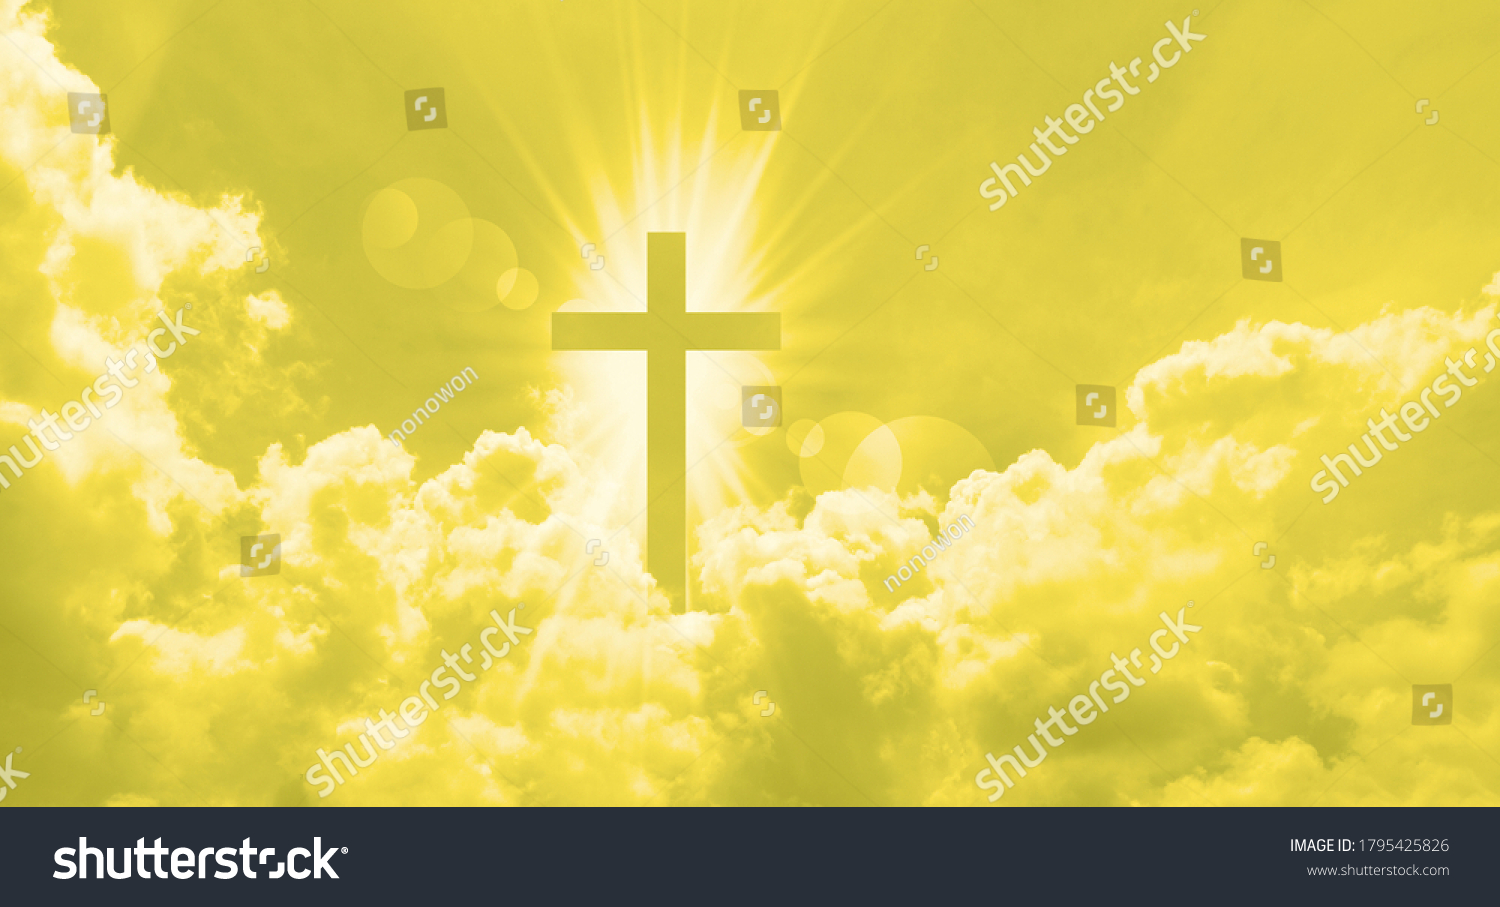 Christian Cross Appears Bright Yellow Sky Stock Photo Edit Now 1795425826